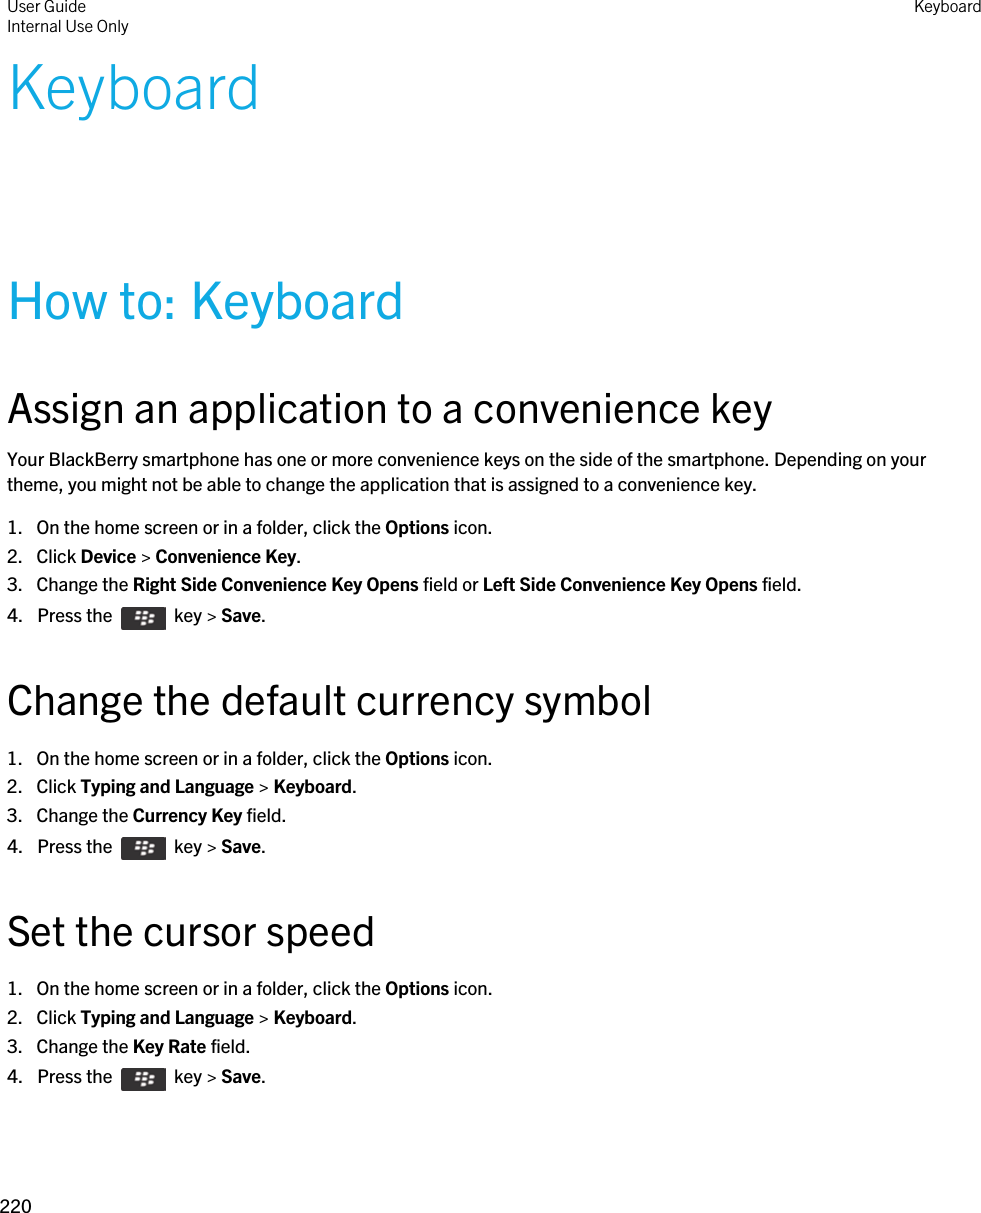 KeyboardHow to: KeyboardAssign an application to a convenience keyYour BlackBerry smartphone has one or more convenience keys on the side of the smartphone. Depending on your theme, you might not be able to change the application that is assigned to a convenience key.1. On the home screen or in a folder, click the Options icon.2. Click Device &gt; Convenience Key.3. Change the Right Side Convenience Key Opens field or Left Side Convenience Key Opens field.4.  Press the    key &gt; Save. Change the default currency symbol1. On the home screen or in a folder, click the Options icon.2. Click Typing and Language &gt; Keyboard.3. Change the Currency Key field.4.  Press the    key &gt; Save. Set the cursor speed1. On the home screen or in a folder, click the Options icon.2. Click Typing and Language &gt; Keyboard.3. Change the Key Rate field.4.  Press the    key &gt; Save. User GuideInternal Use Only Keyboard220 